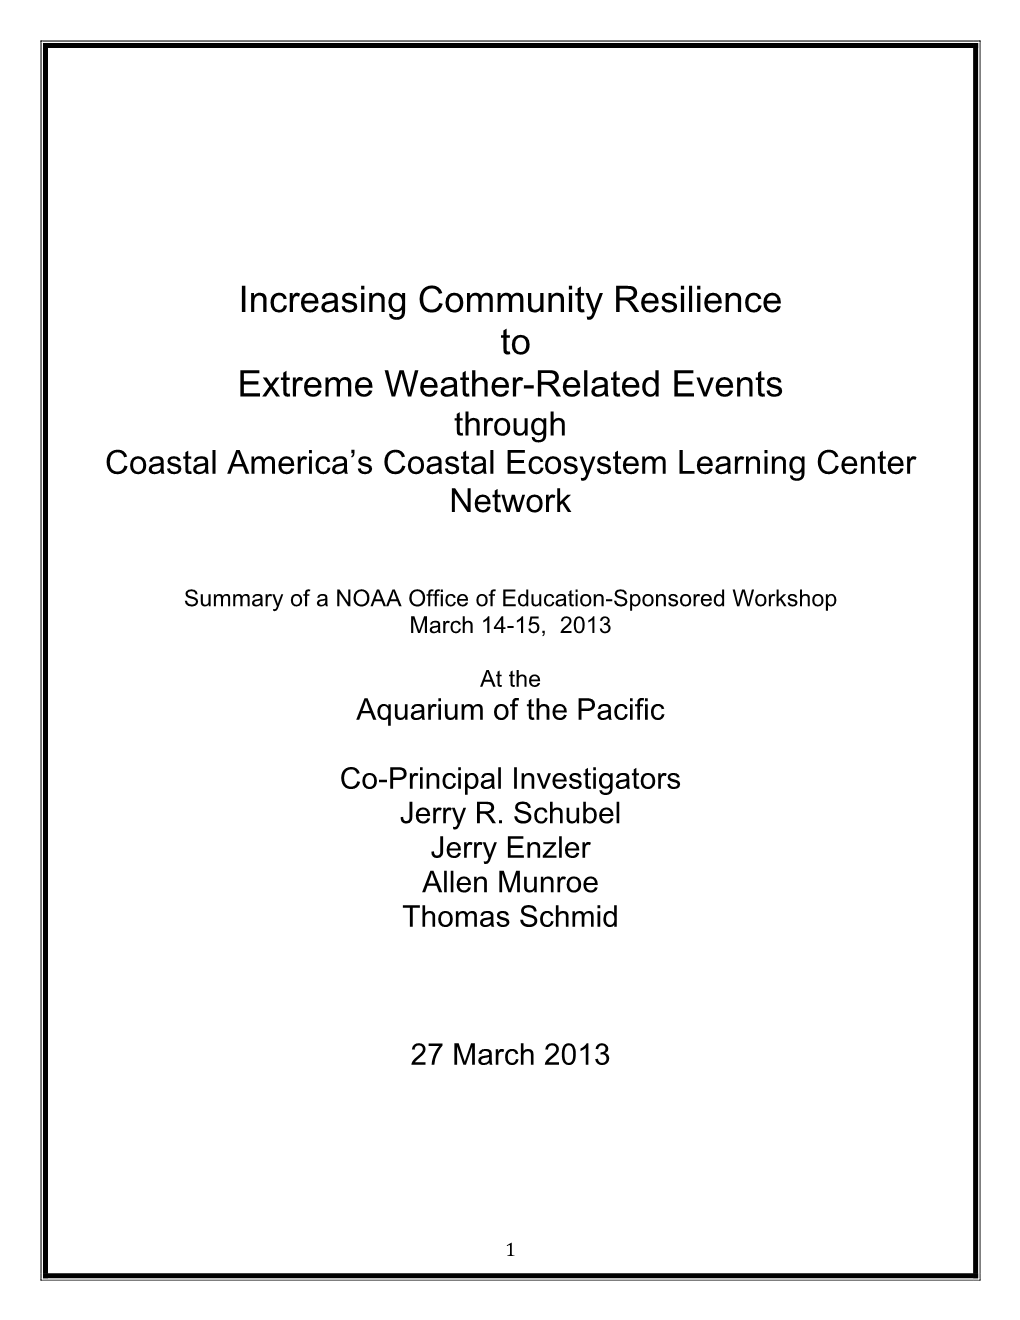 Increasing Community Resilience to Extreme Weather-Related Events Through Coastal America’S Coastal Ecosystem Learning Center Network